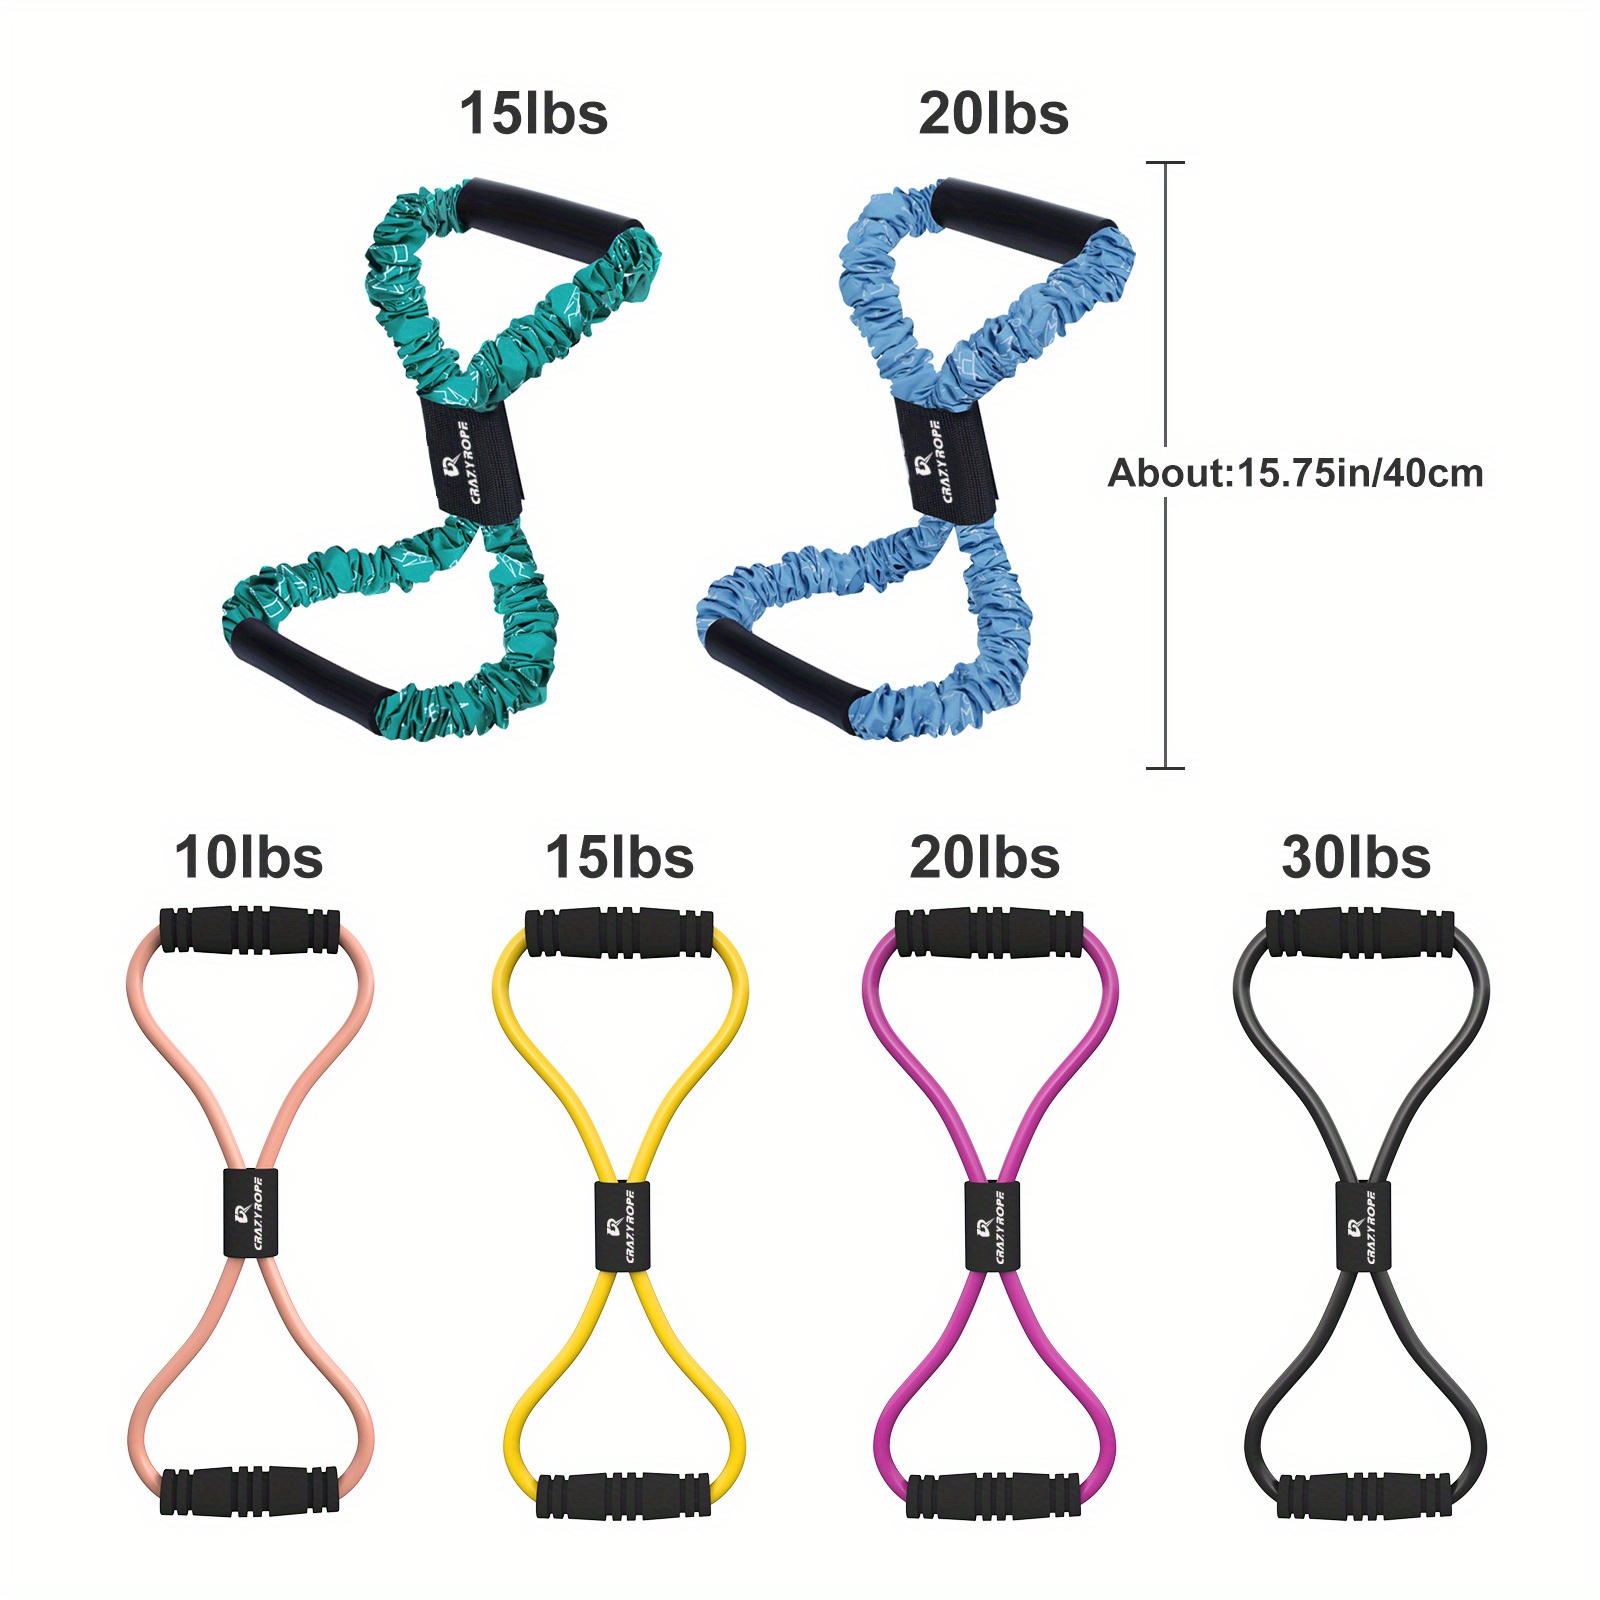 8 Shaped Resistance Bands Stretch Fitness Band Pull Rope Chest Arm